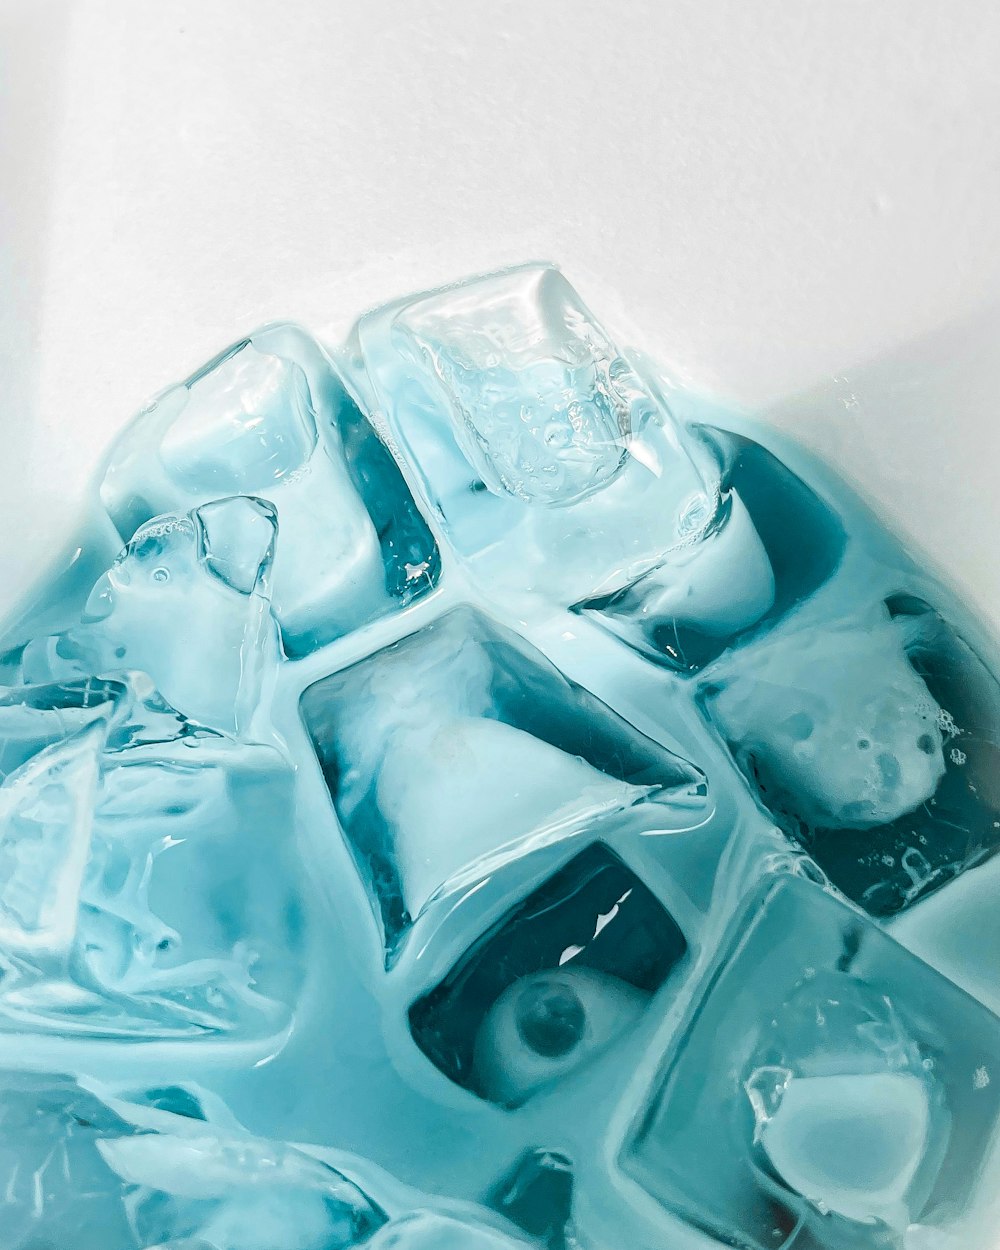 a close up of ice cubes on a white surface